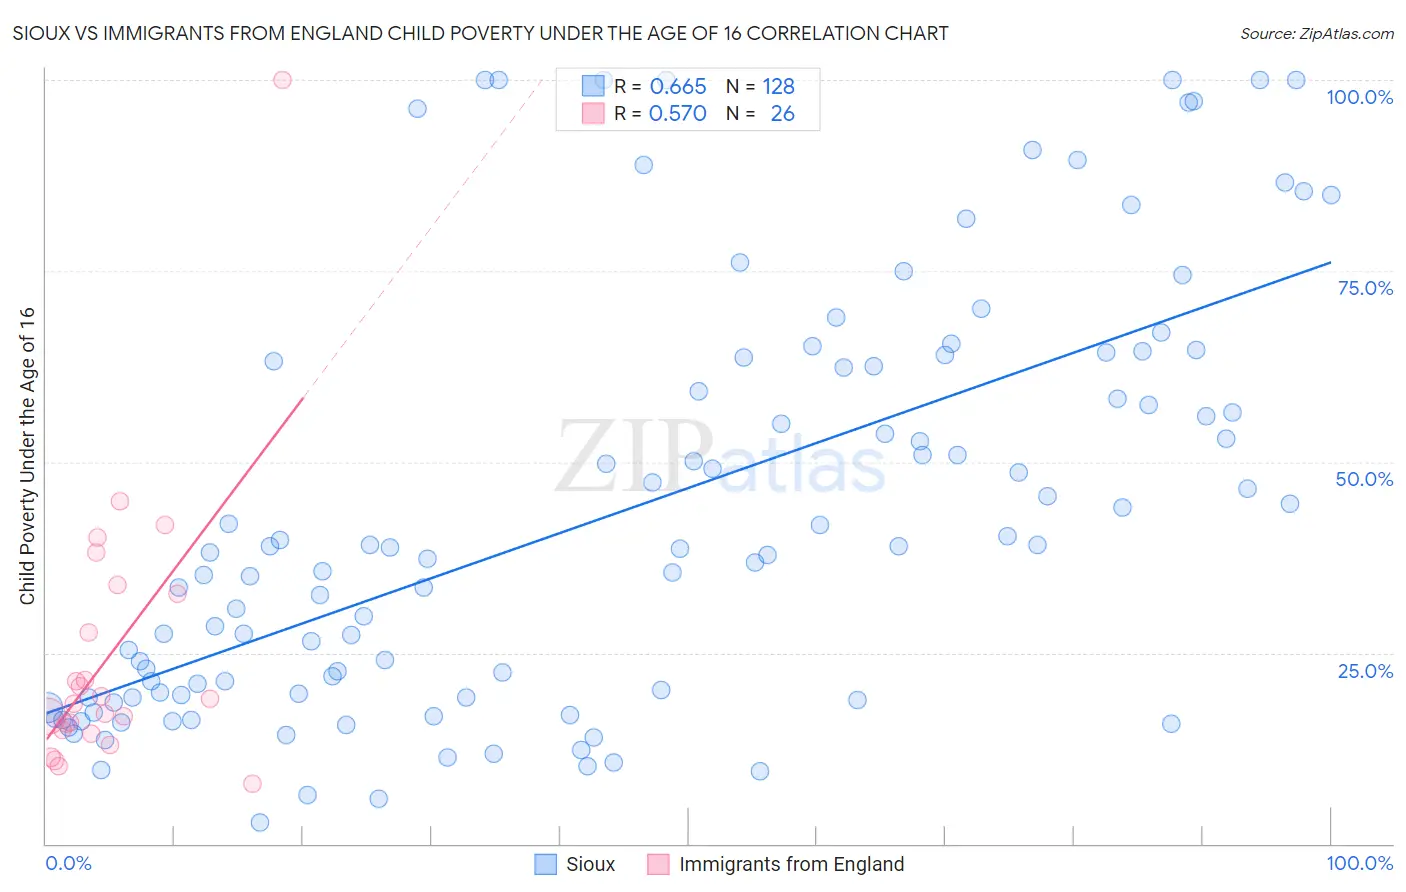 Sioux vs Immigrants from England Child Poverty Under the Age of 16